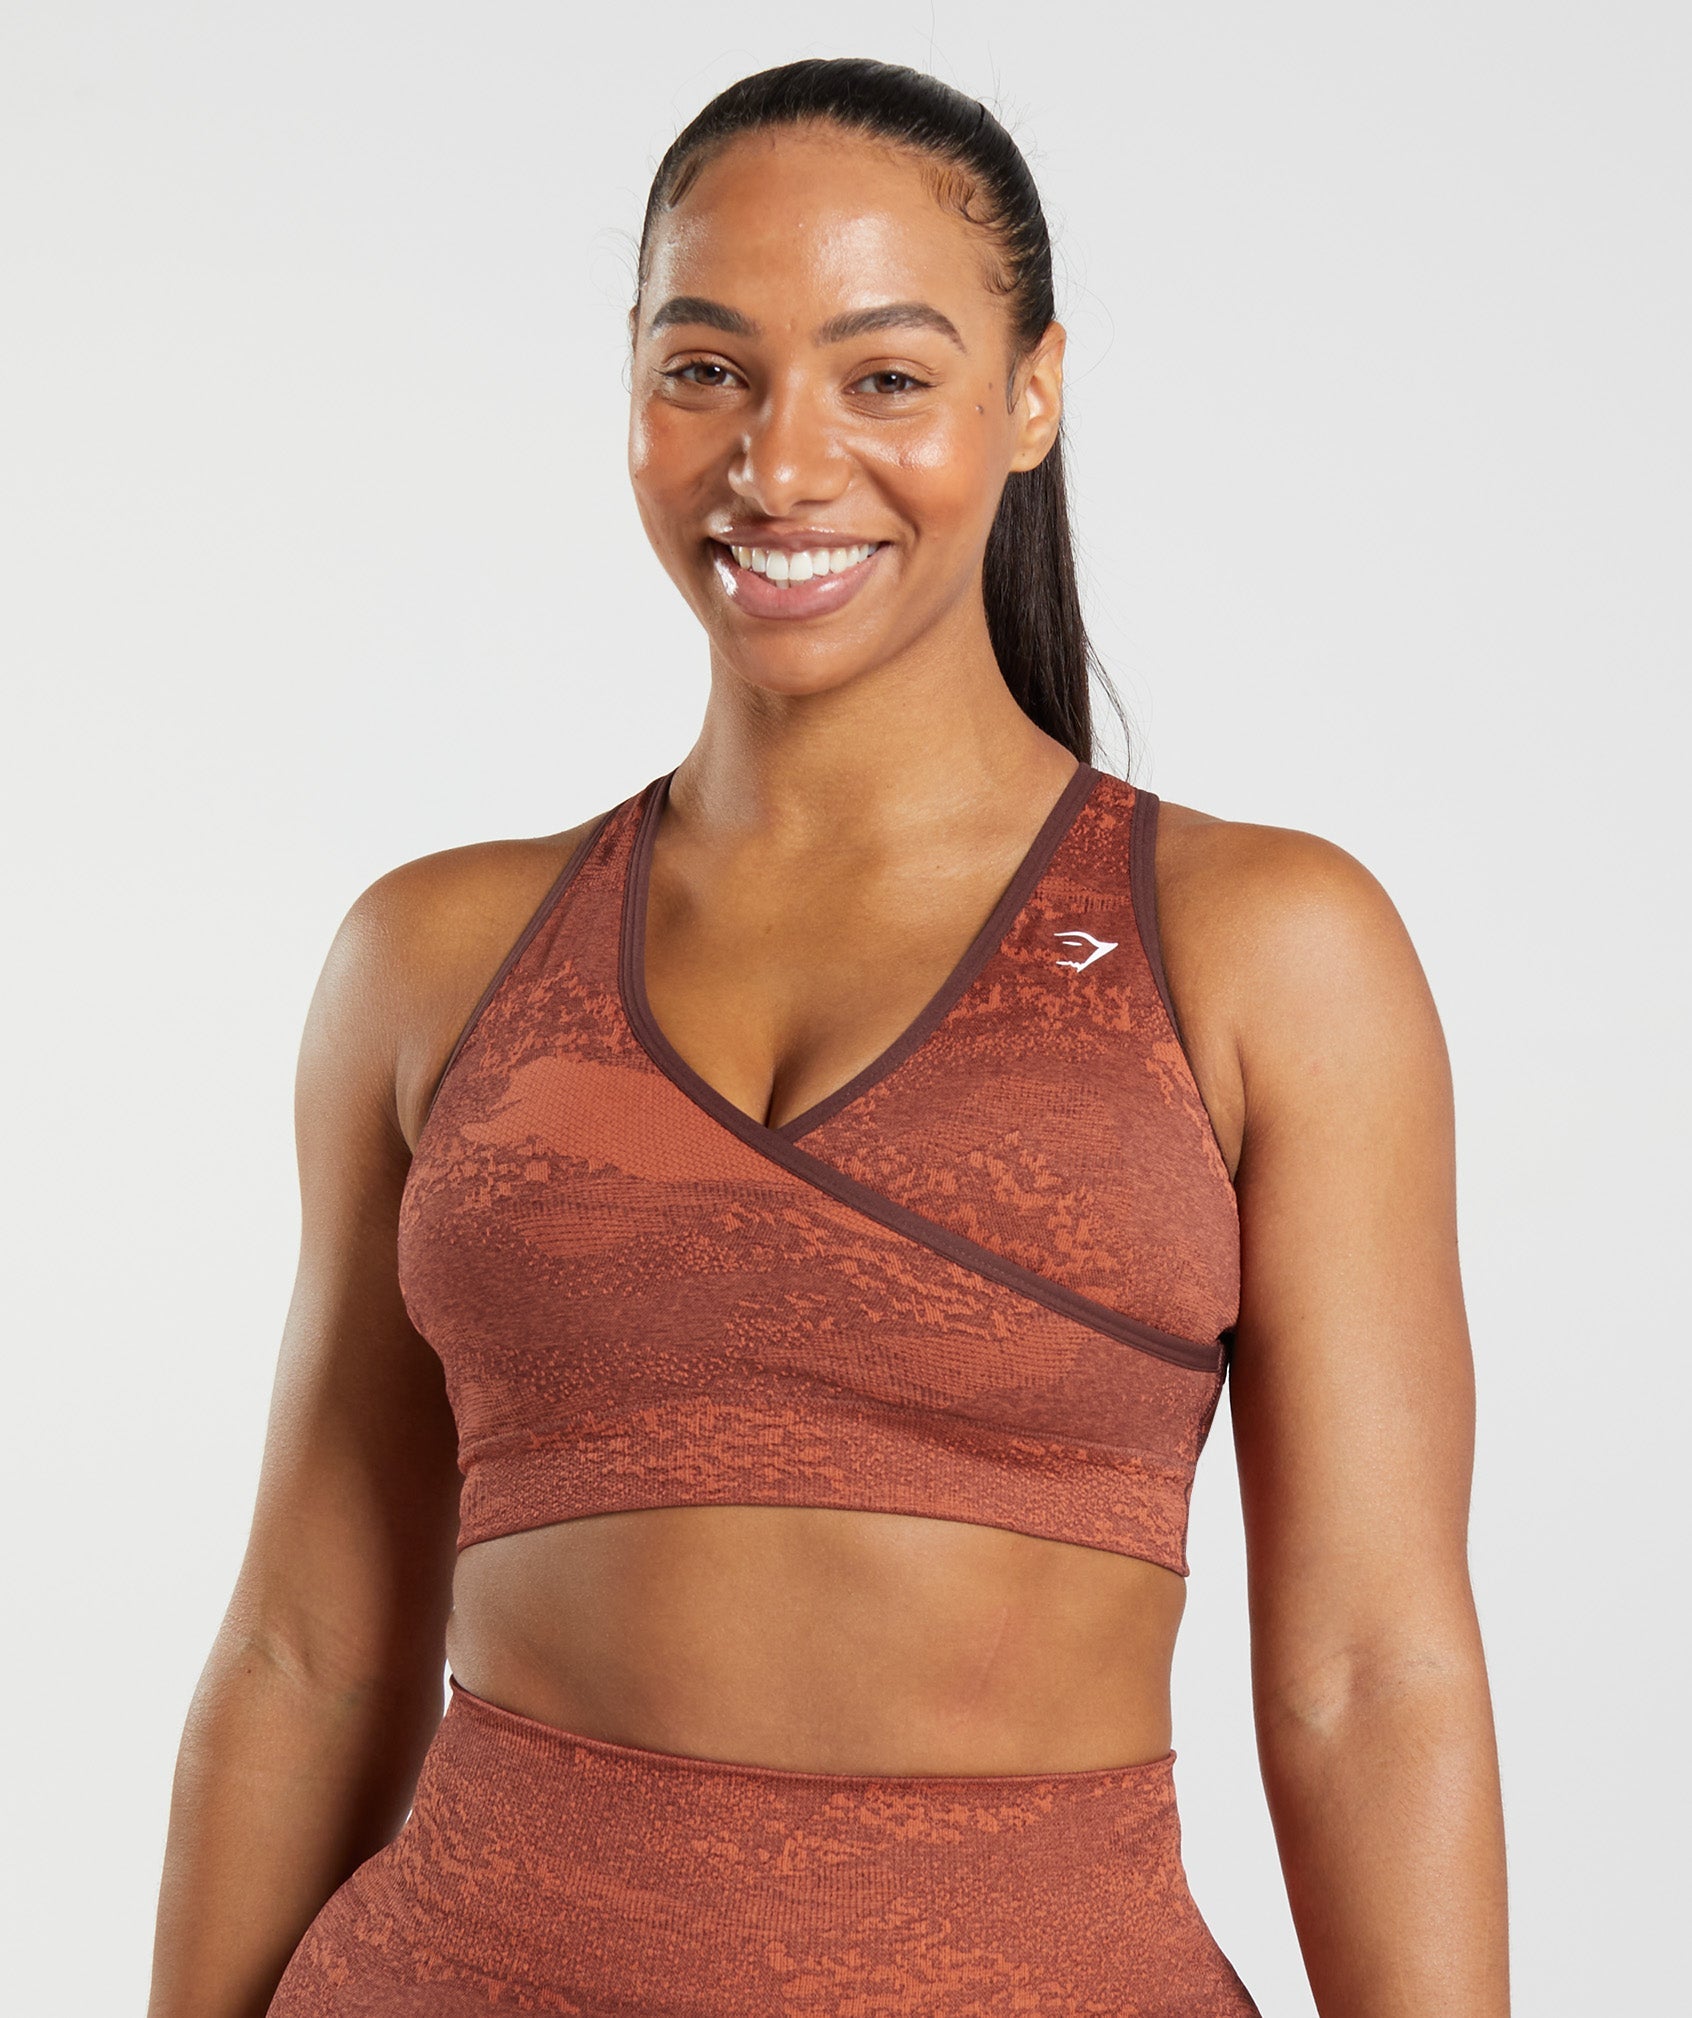 Adapt Camo Seamless Sports Bra in Storm Red/Cherry Brown - view 1